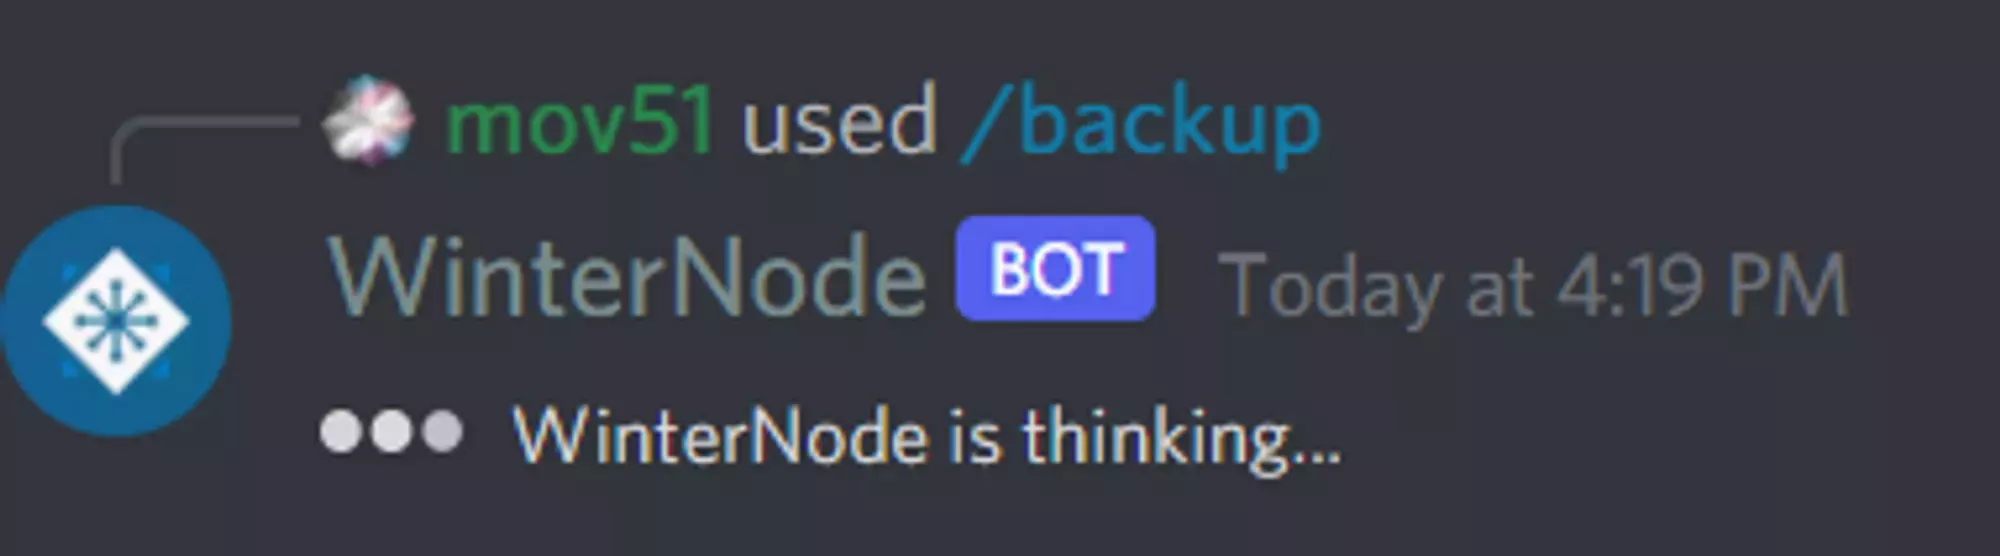 The WinterNode Discord Bot responding to the use of the /backup command with &quot;WinterNode is thinking...&quot;